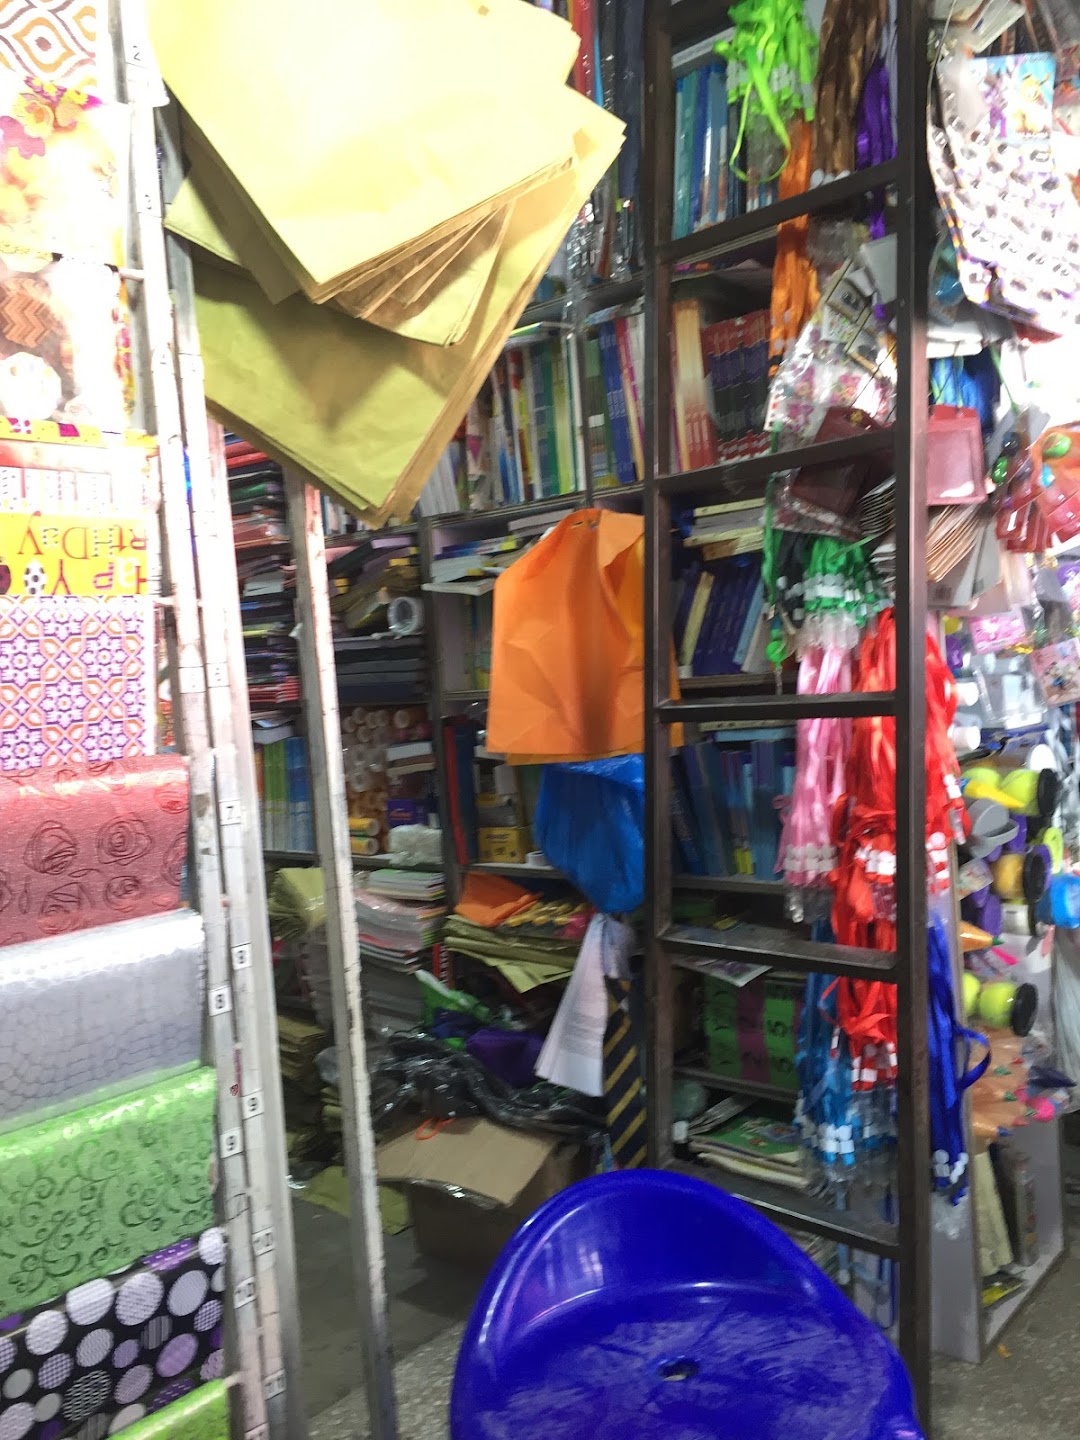 Syed Books and Stationary